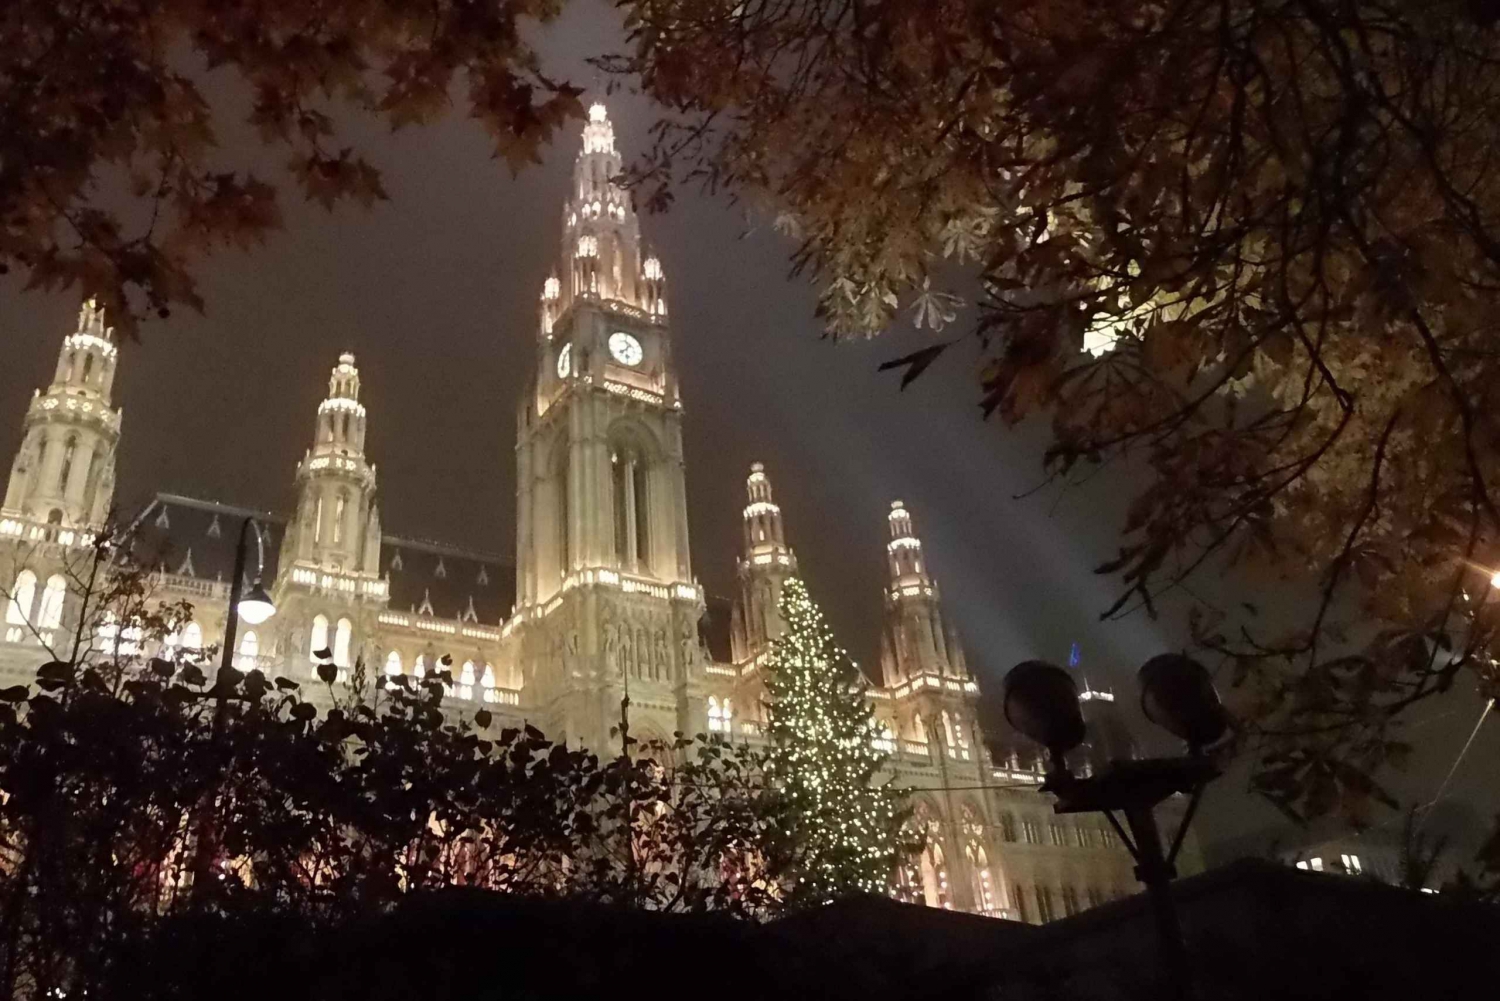 Walking on the historical trail of Viennese Christmas Trees